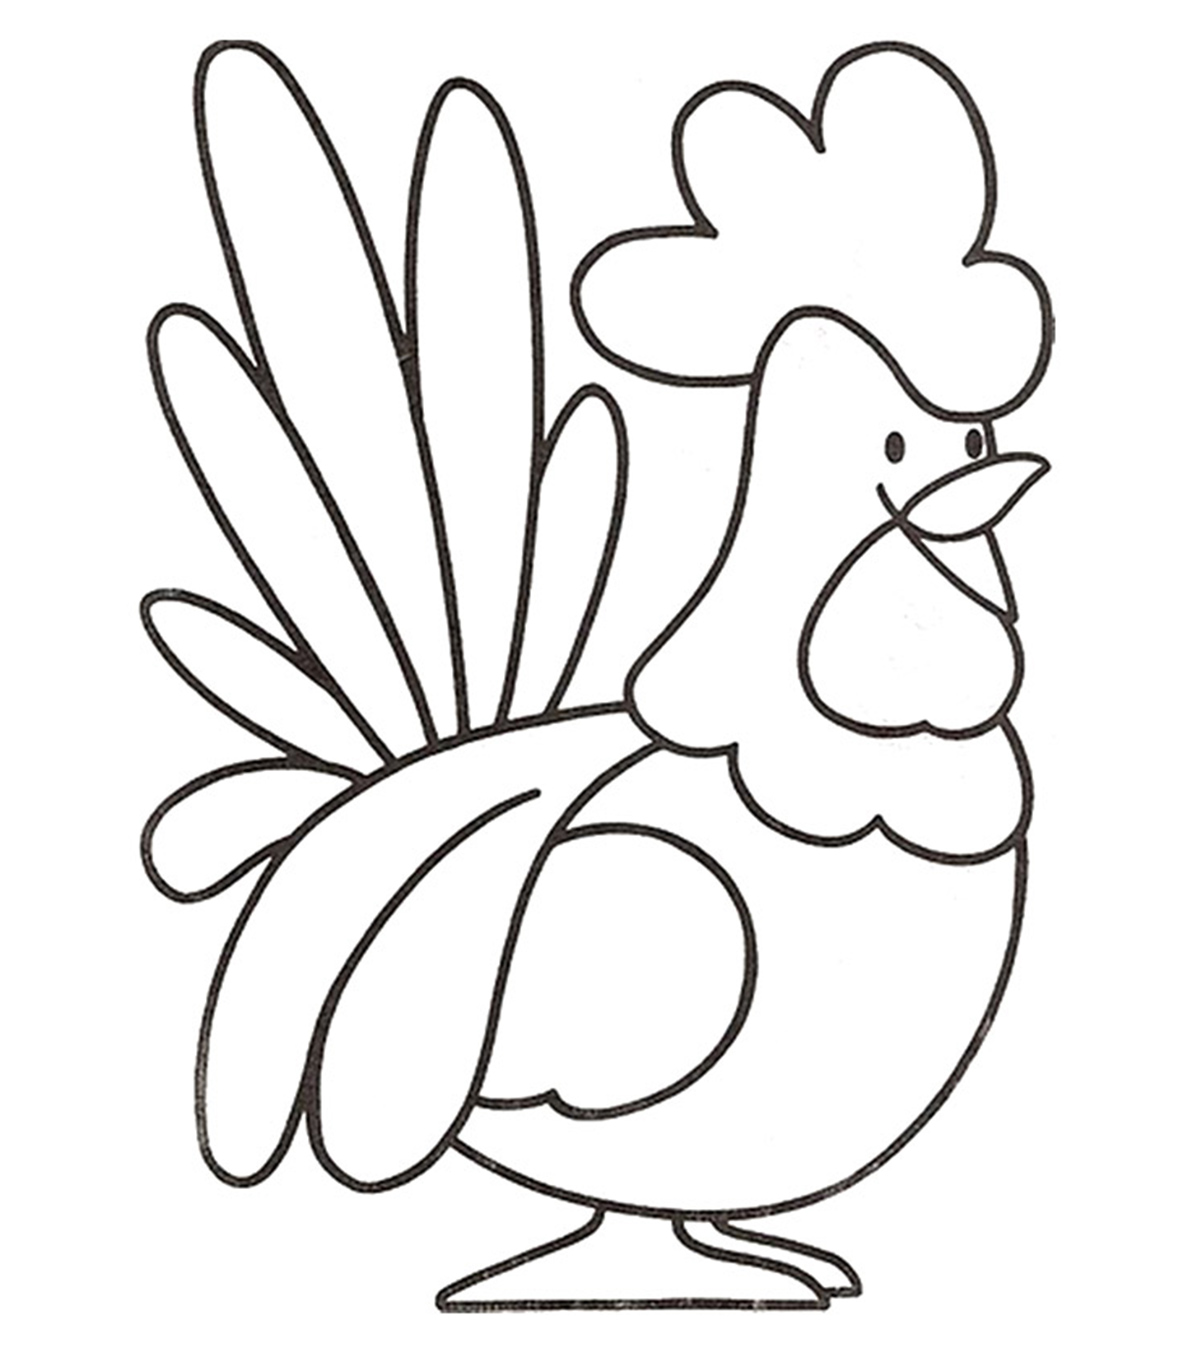 Top 10 Rooster Coloring Pages Your Toddler Will Love To Color